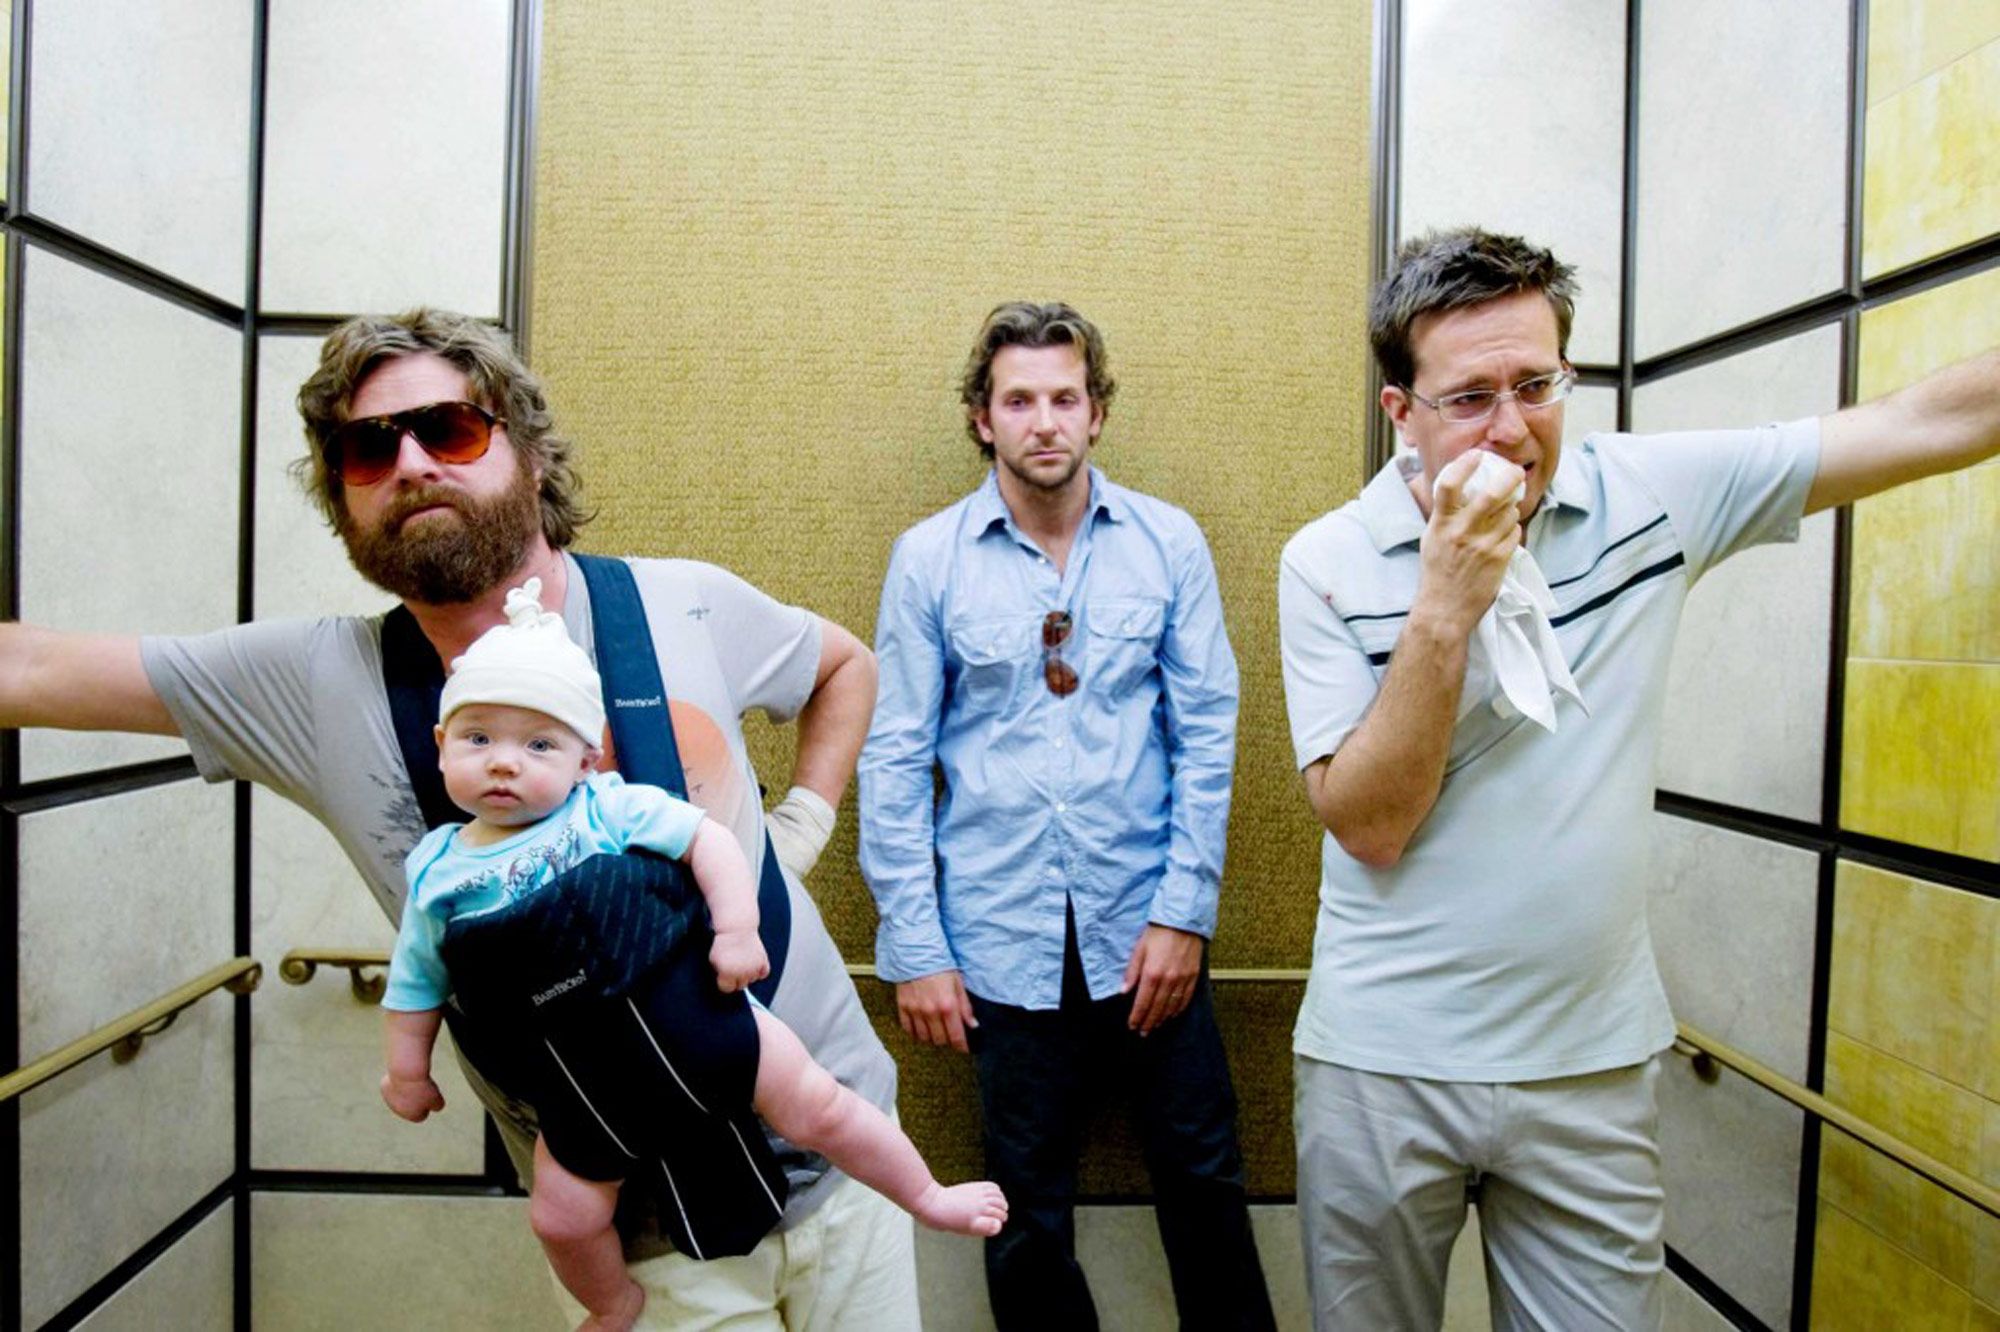 Here's what the baby from The Hangover looks like now